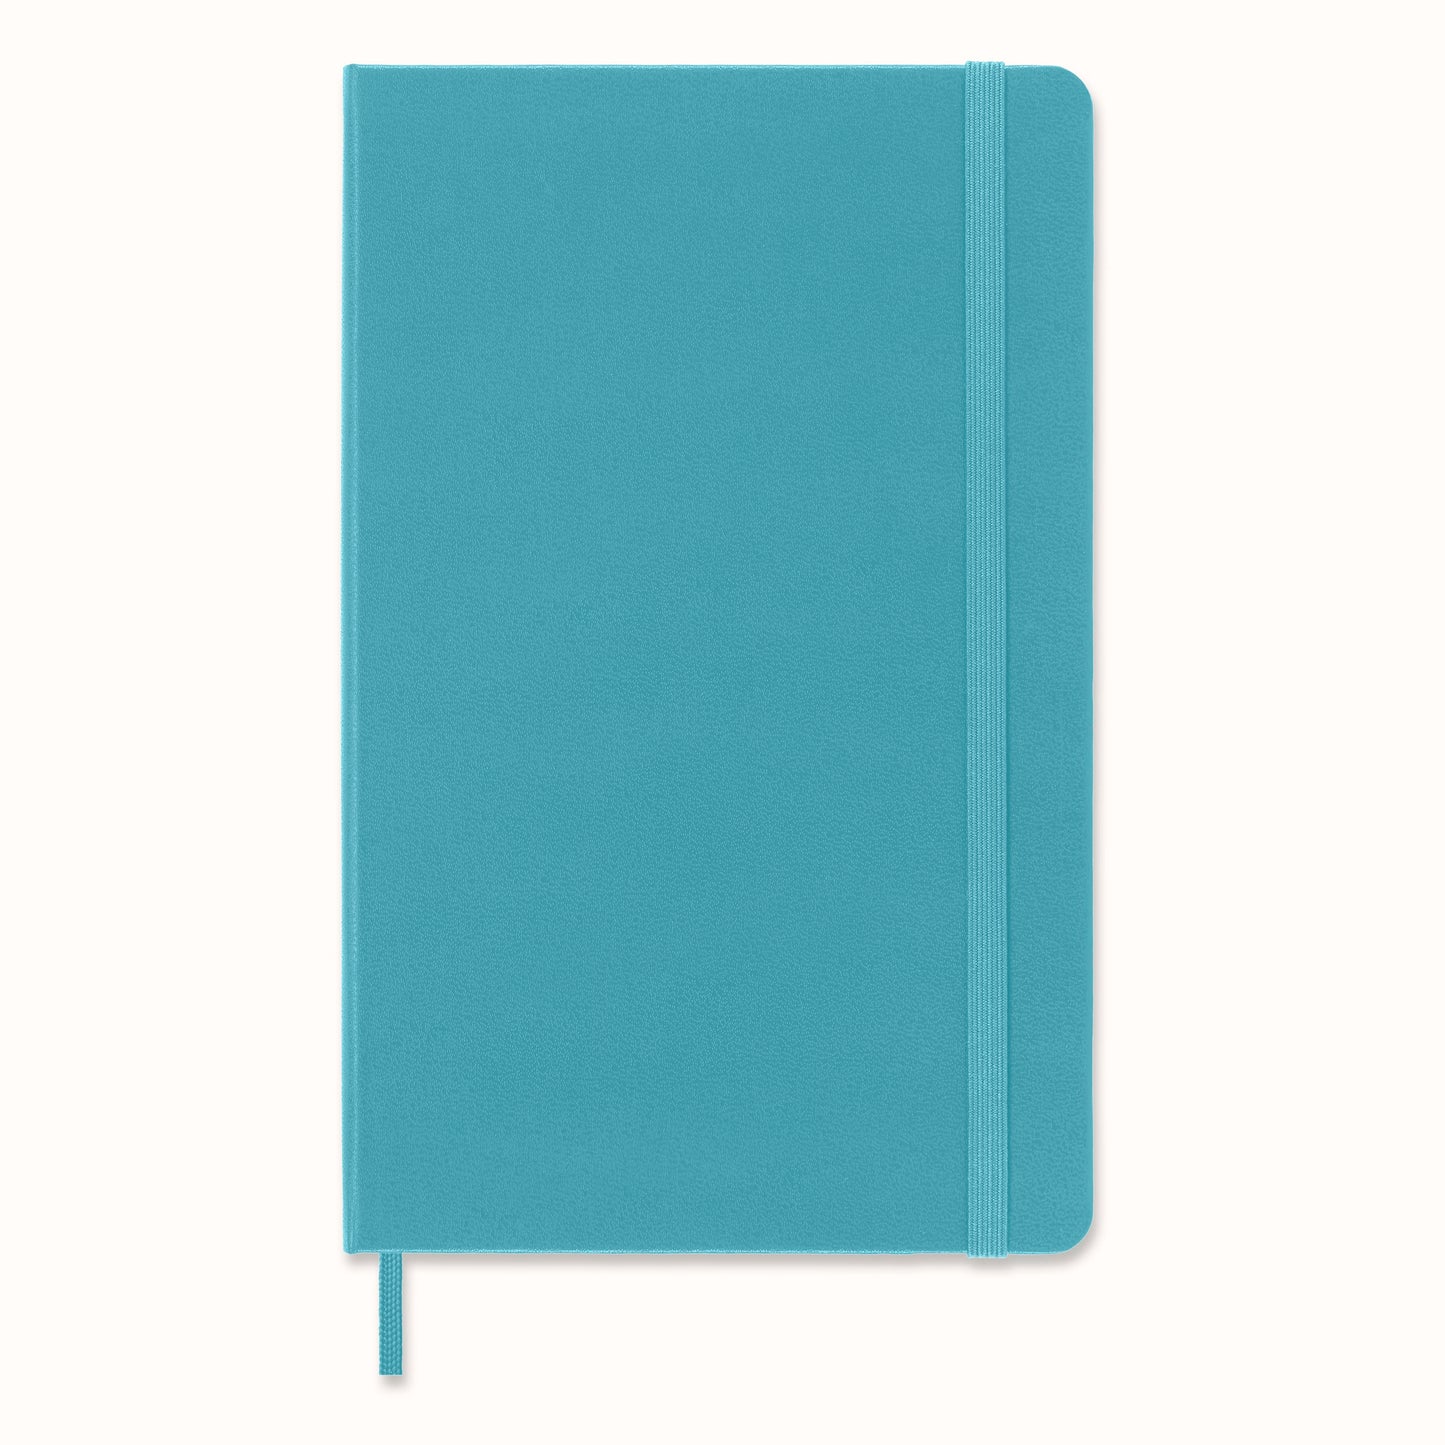 Classic Large Ruled Hard Cover Journal - Reef Blue